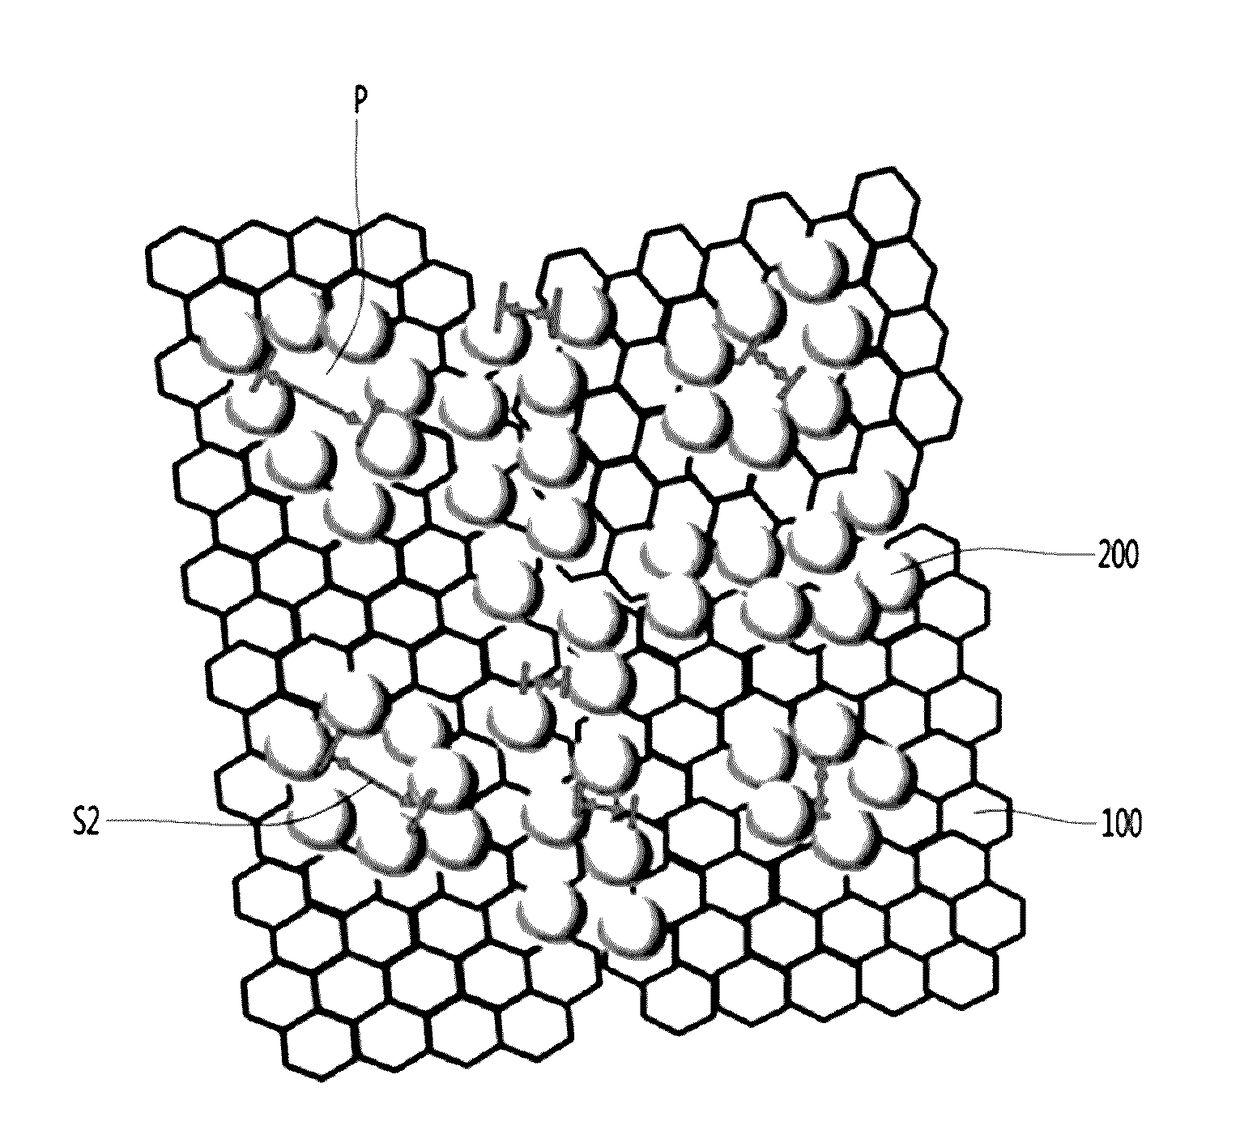 Membrane based on graphene and method of manufacturing same